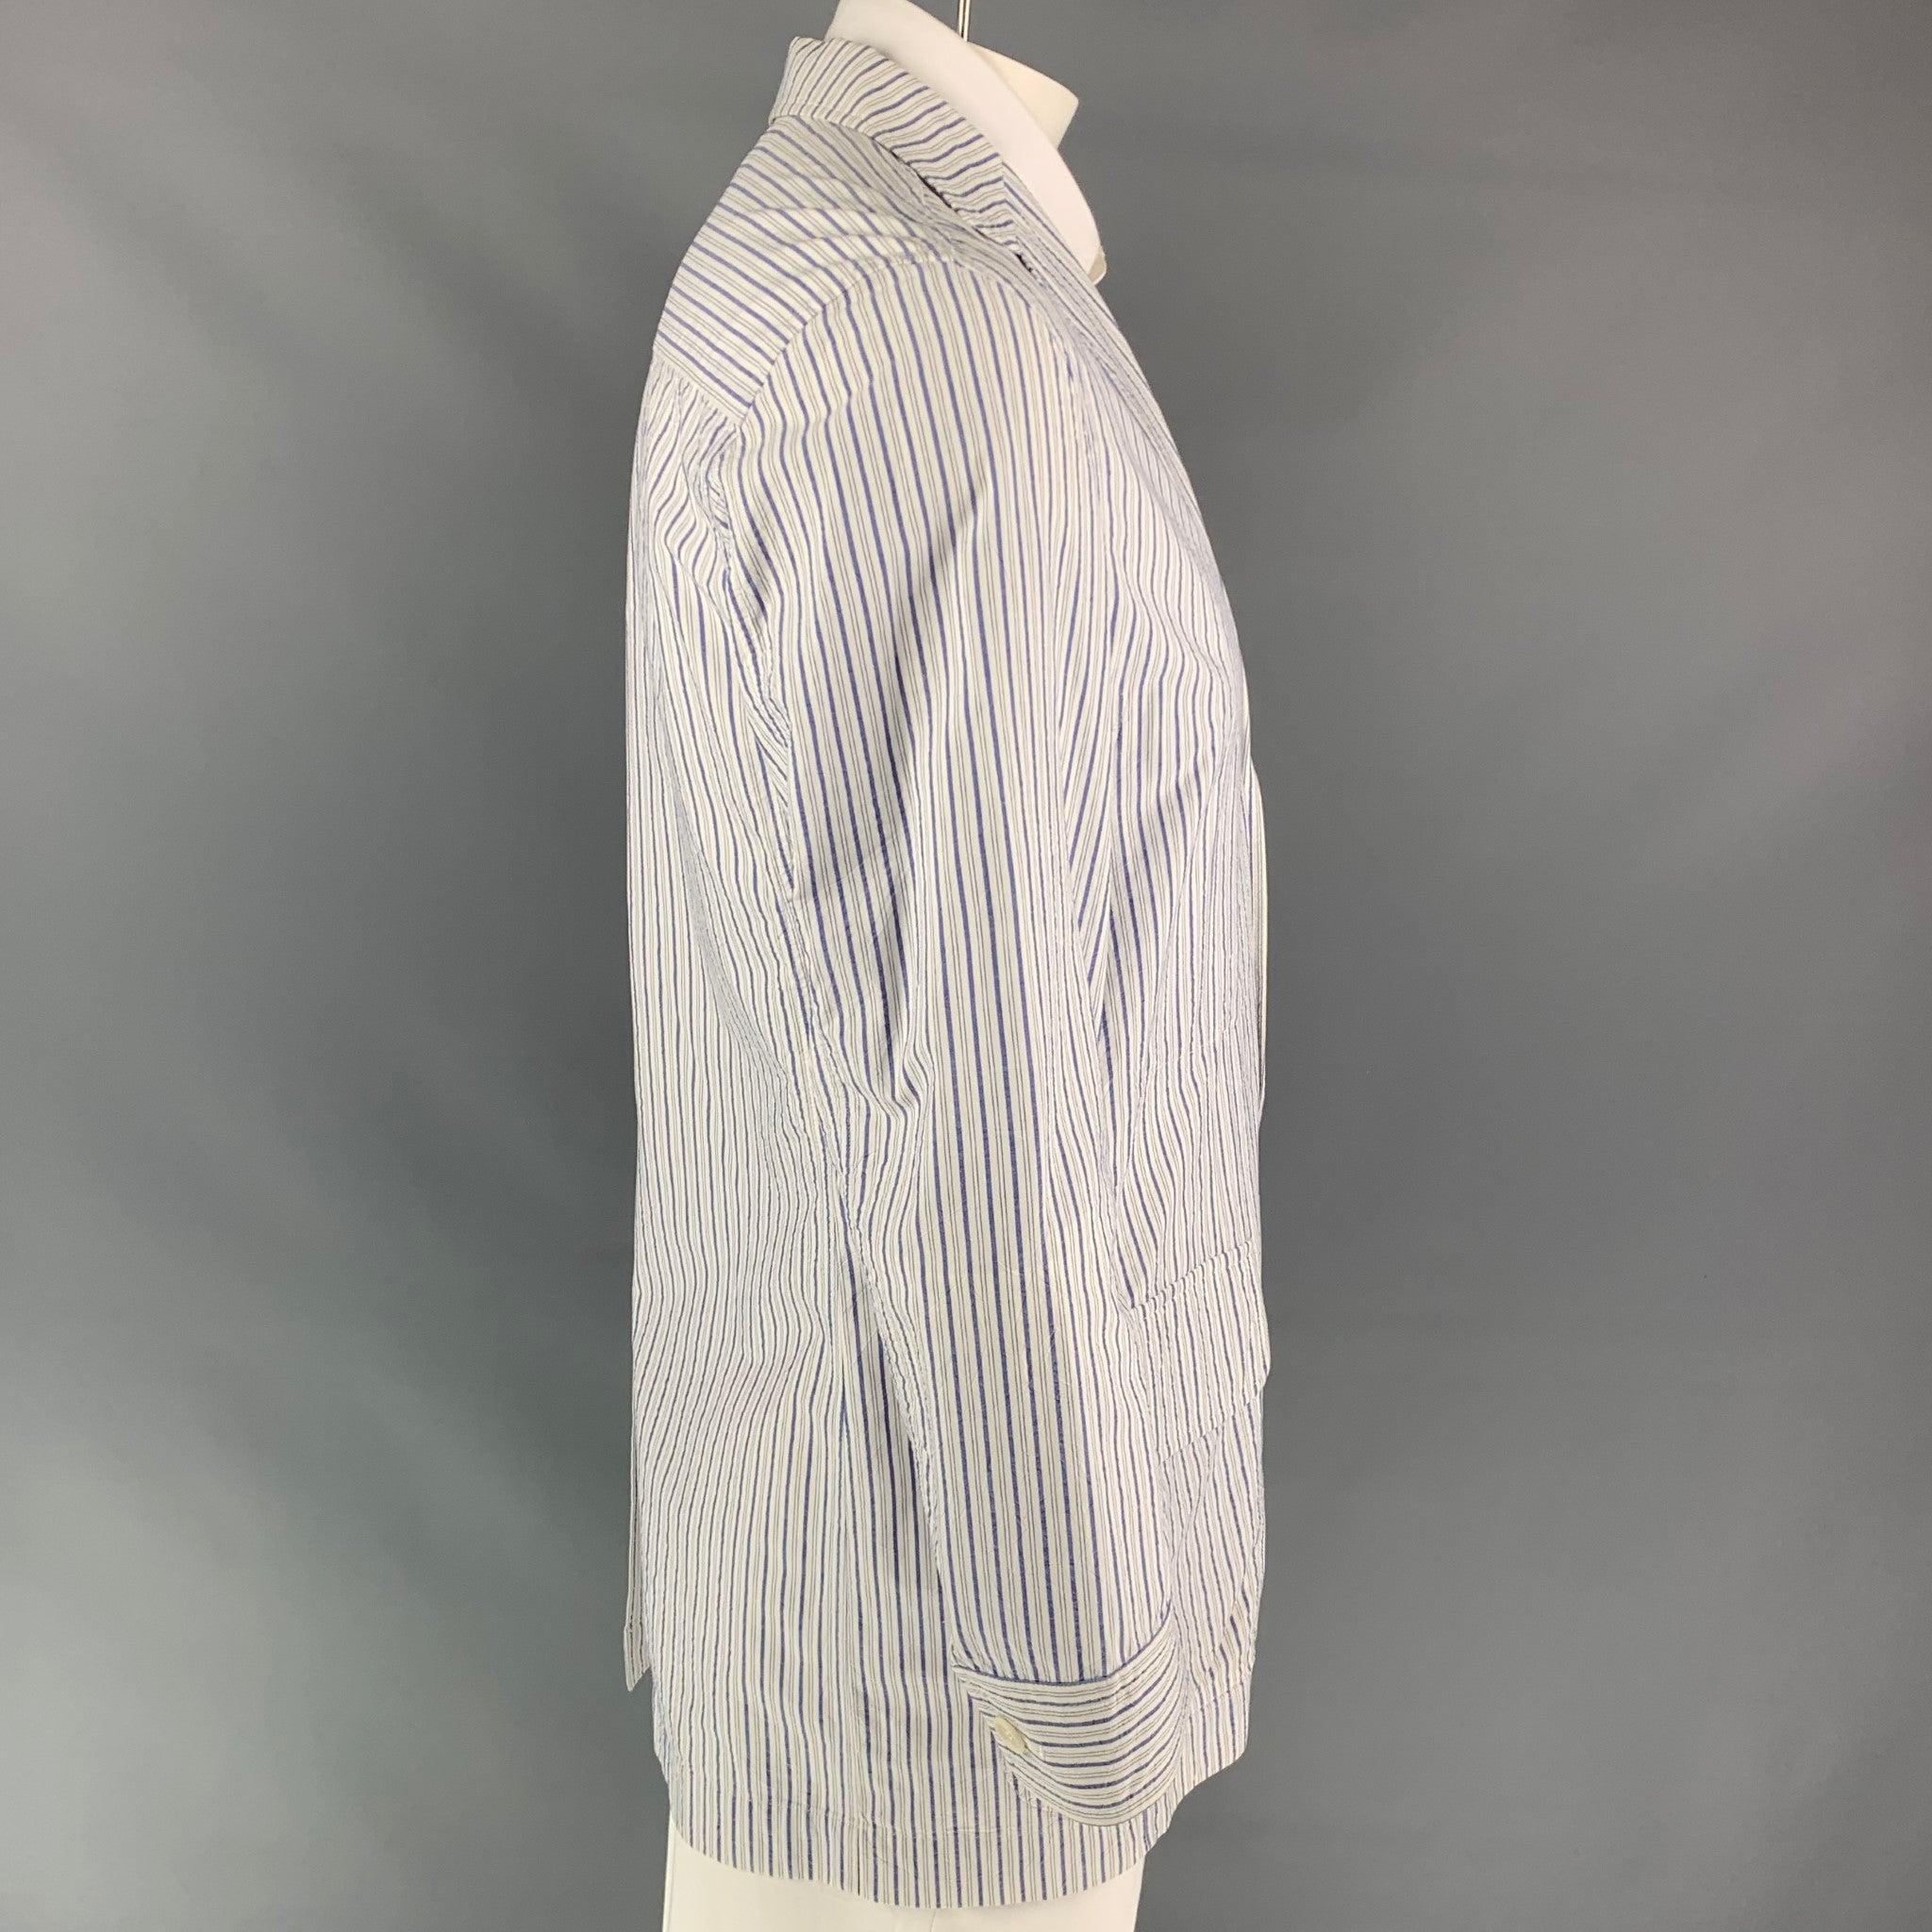 ISSEY MIYAKE Size 44 White & Blue Stripe Cotton Sport Coat In Good Condition For Sale In San Francisco, CA